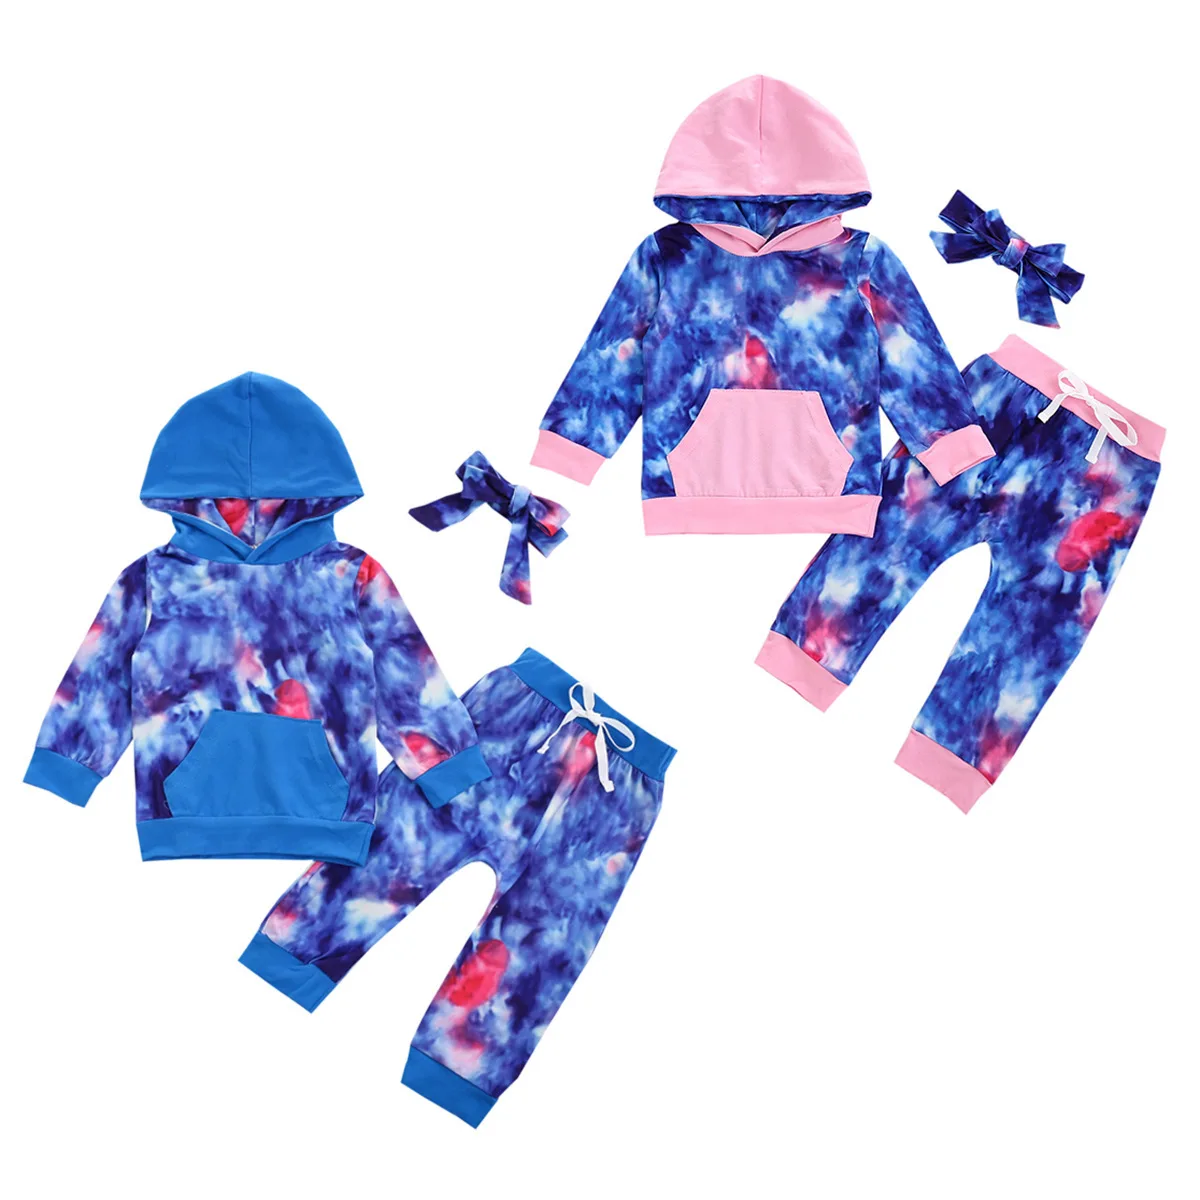 

2021 New autumn winter children wear tie dye long sleeve top hooded trousers sports fashion suit baby clothes set for girls, As pic shows, we can according to your request also